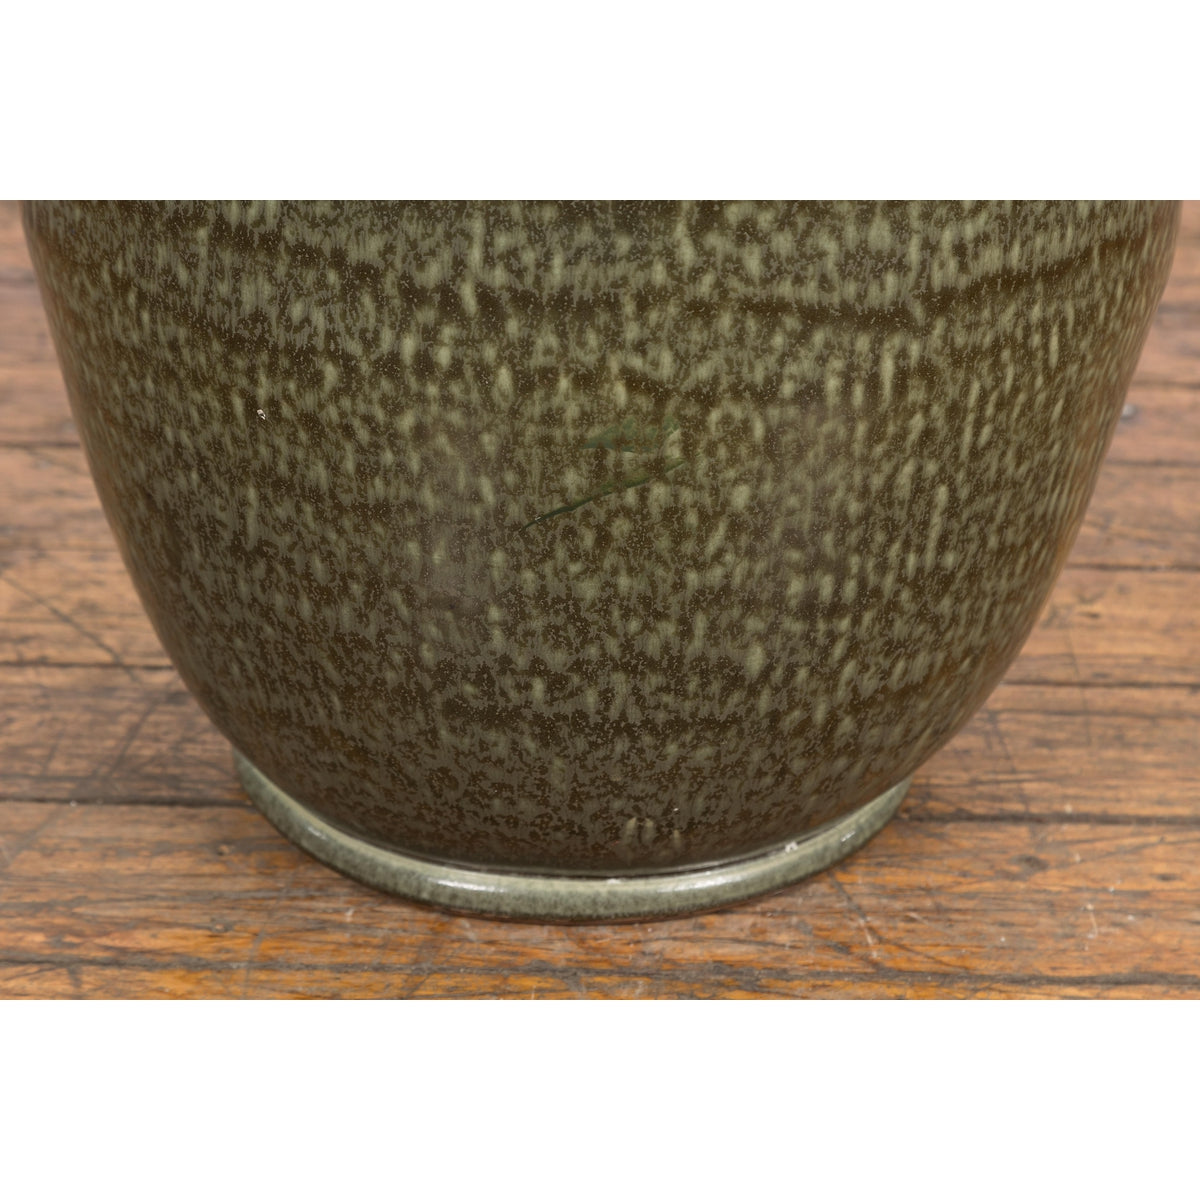 Large Green Glazed Planter with Oval Shaped Opening-YNE836-7. Asian & Chinese Furniture, Art, Antiques, Vintage Home Décor for sale at FEA Home